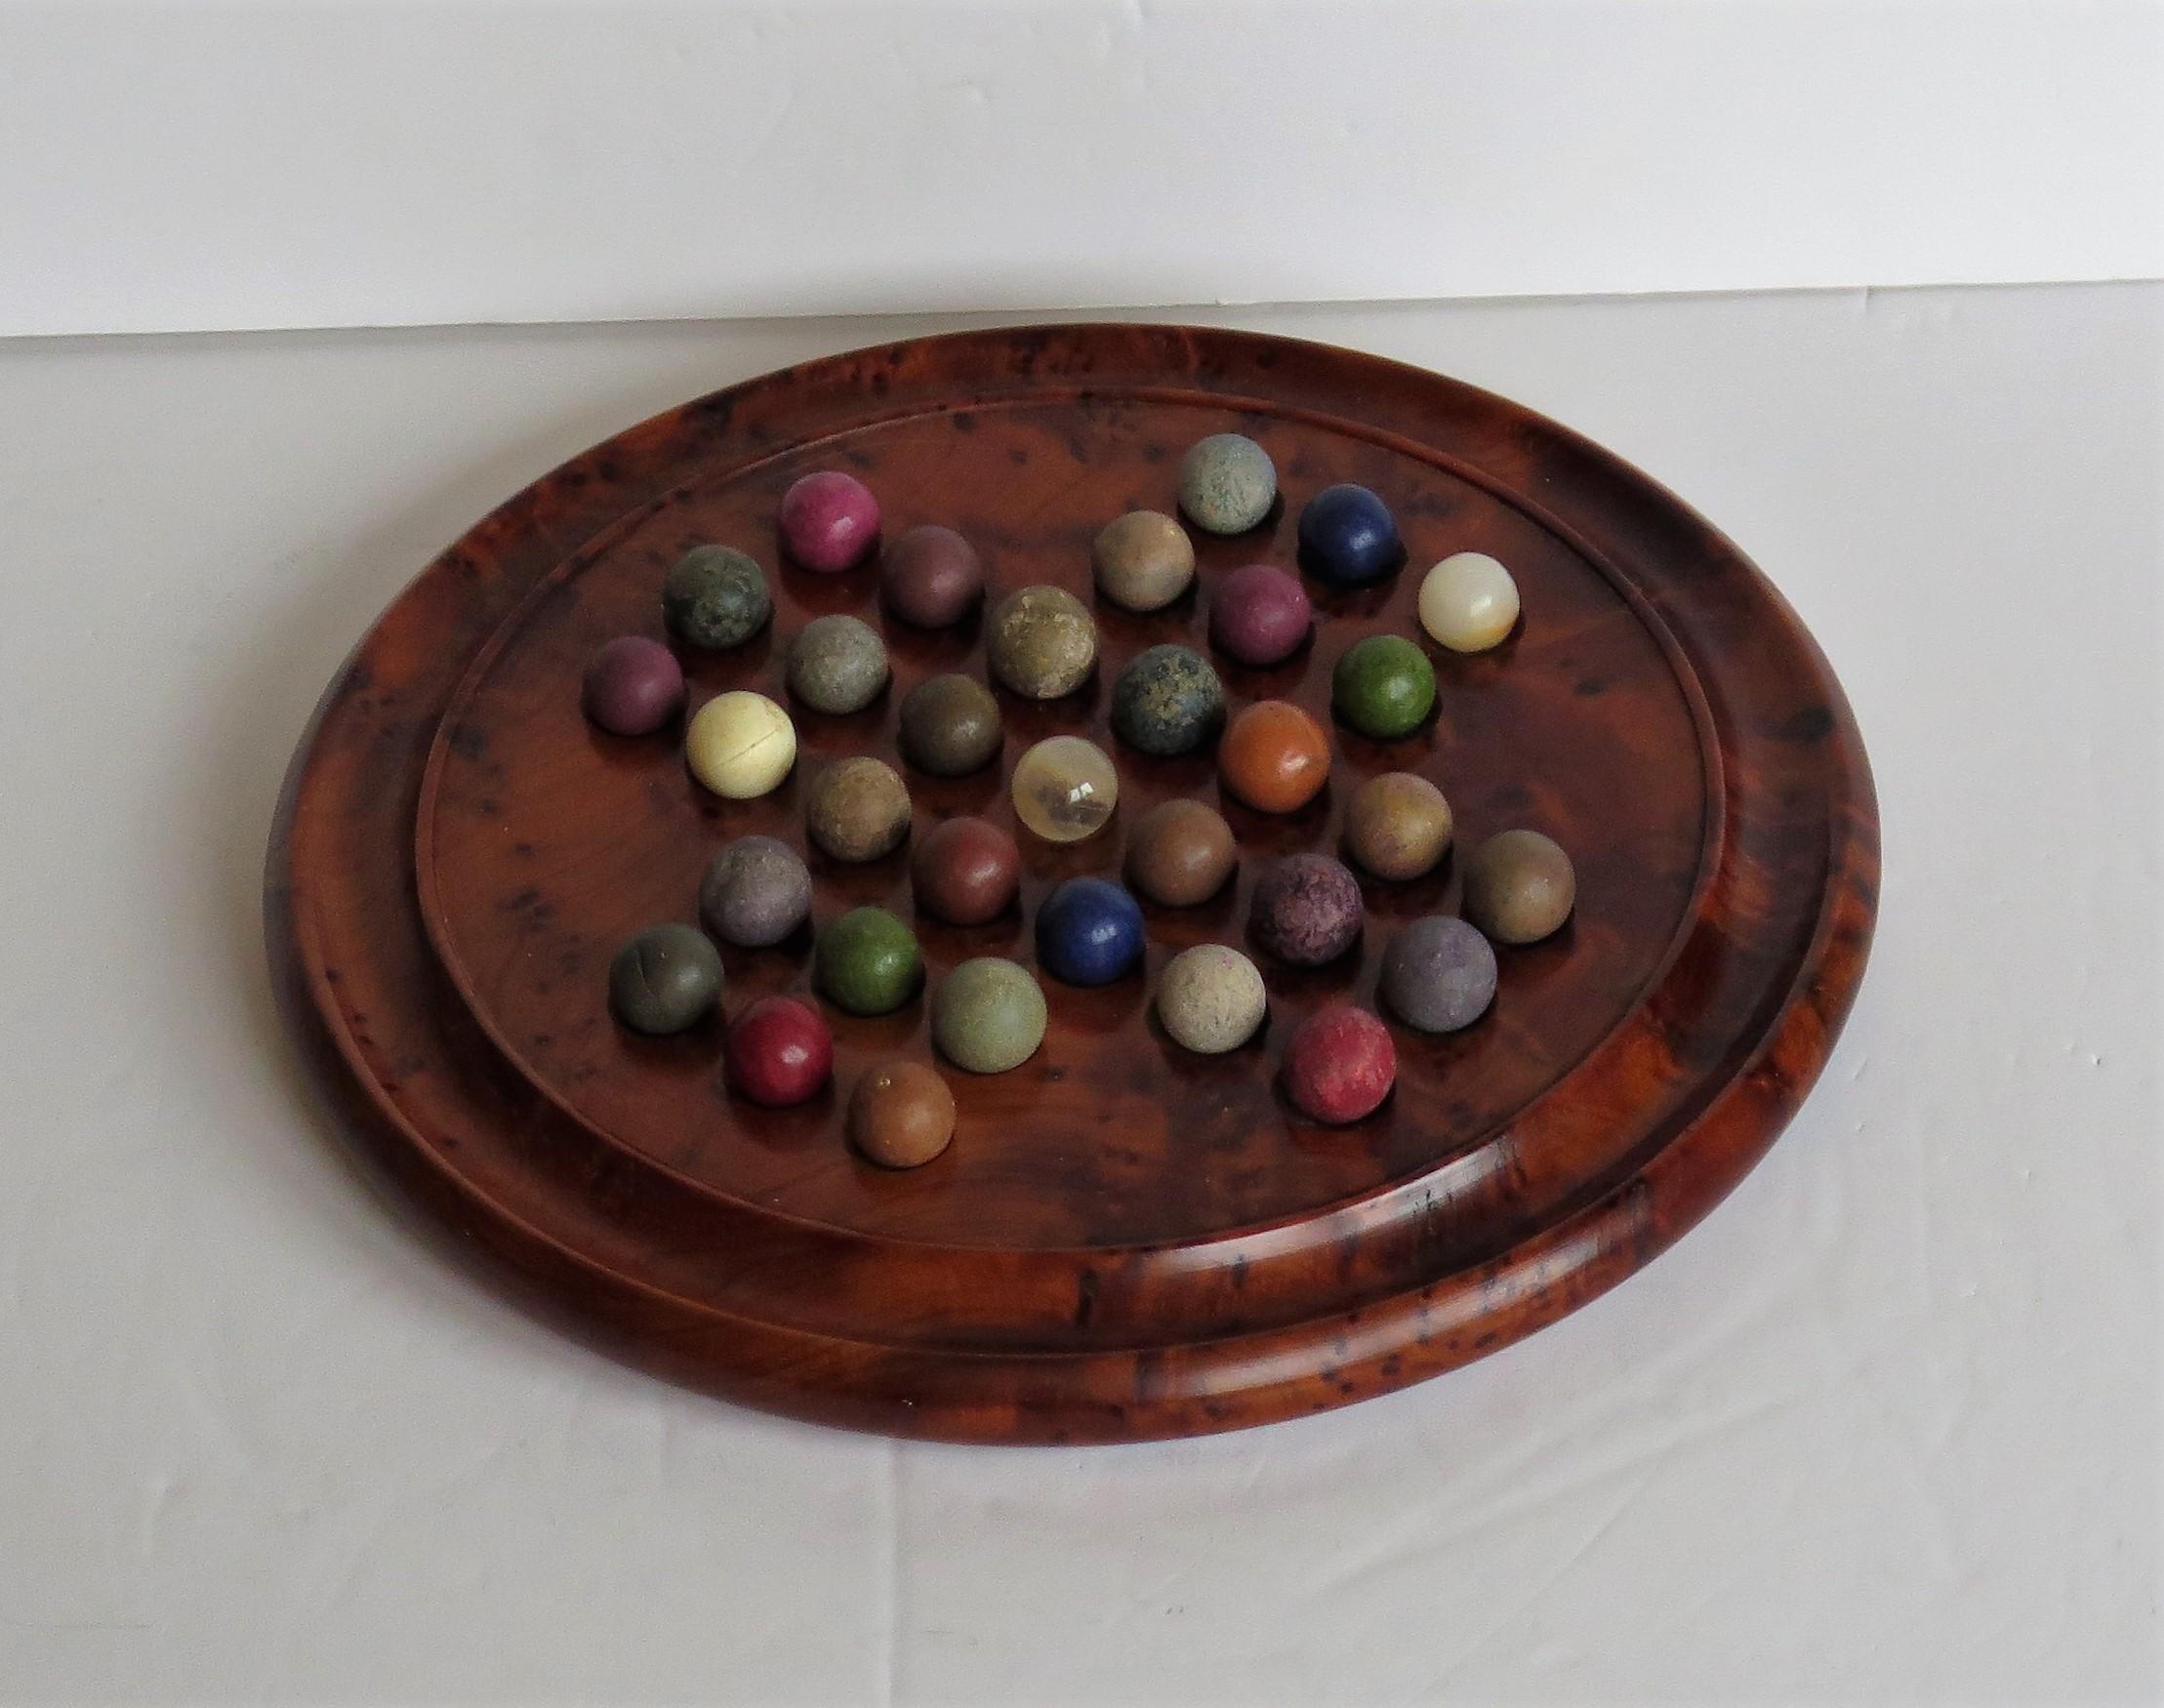 Edwardian Marble Solitaire Board Game with 33 Early Handmade Stone Marbles, circa 1900